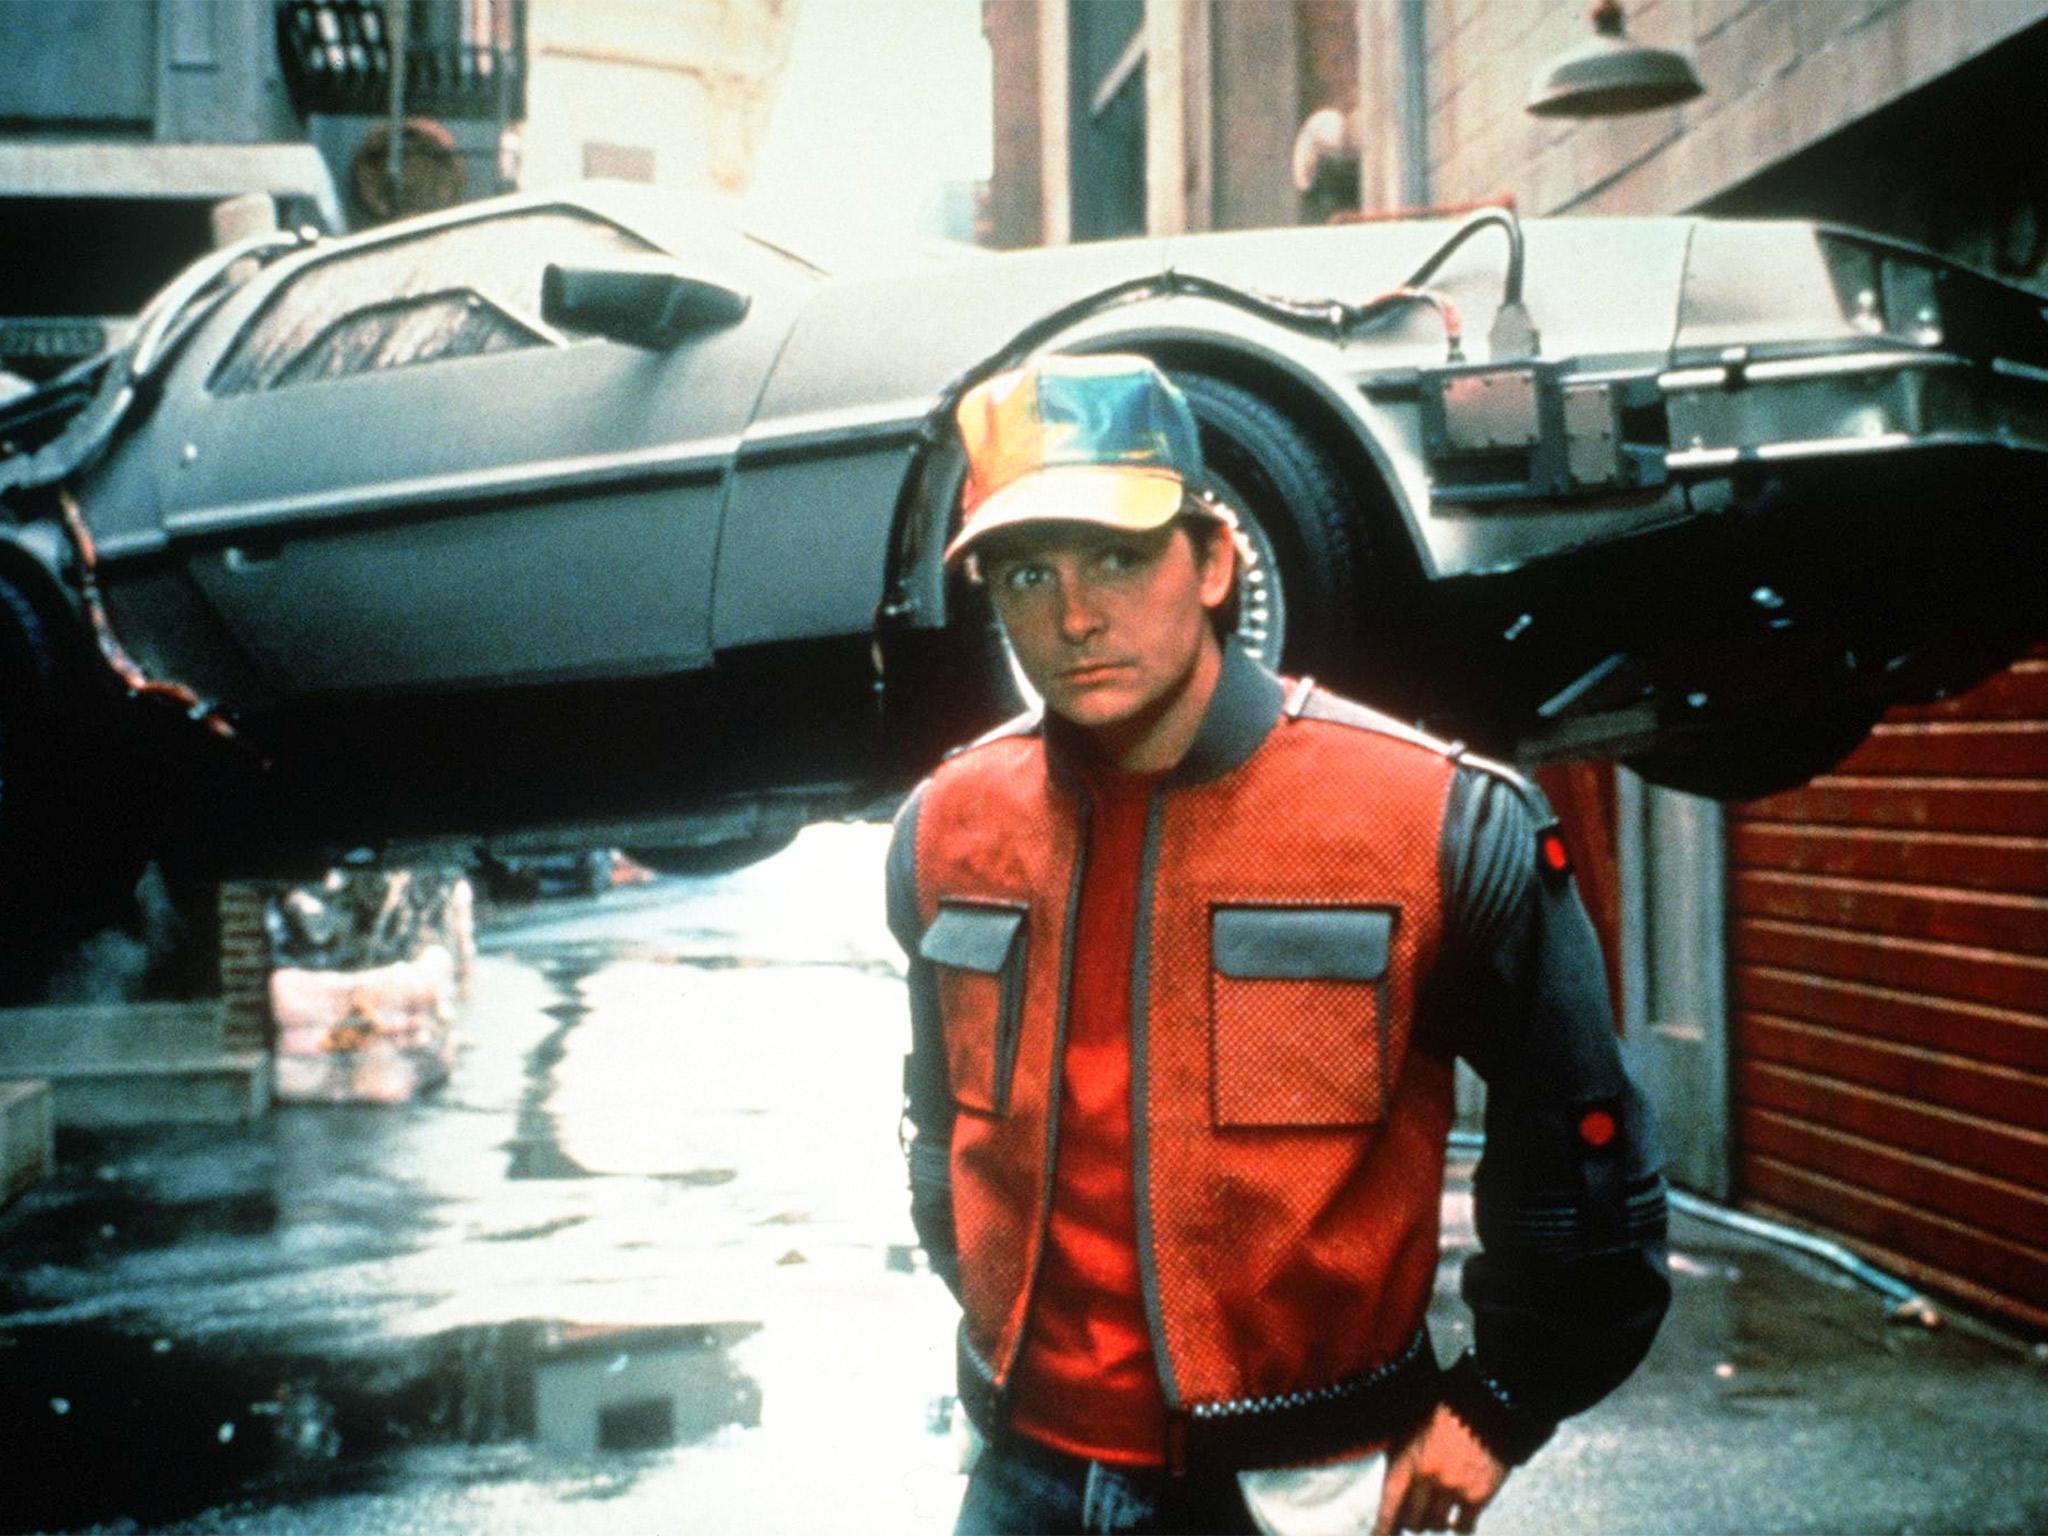 Michael J. Fox as Marty McFly in ‘Back to the Future II’